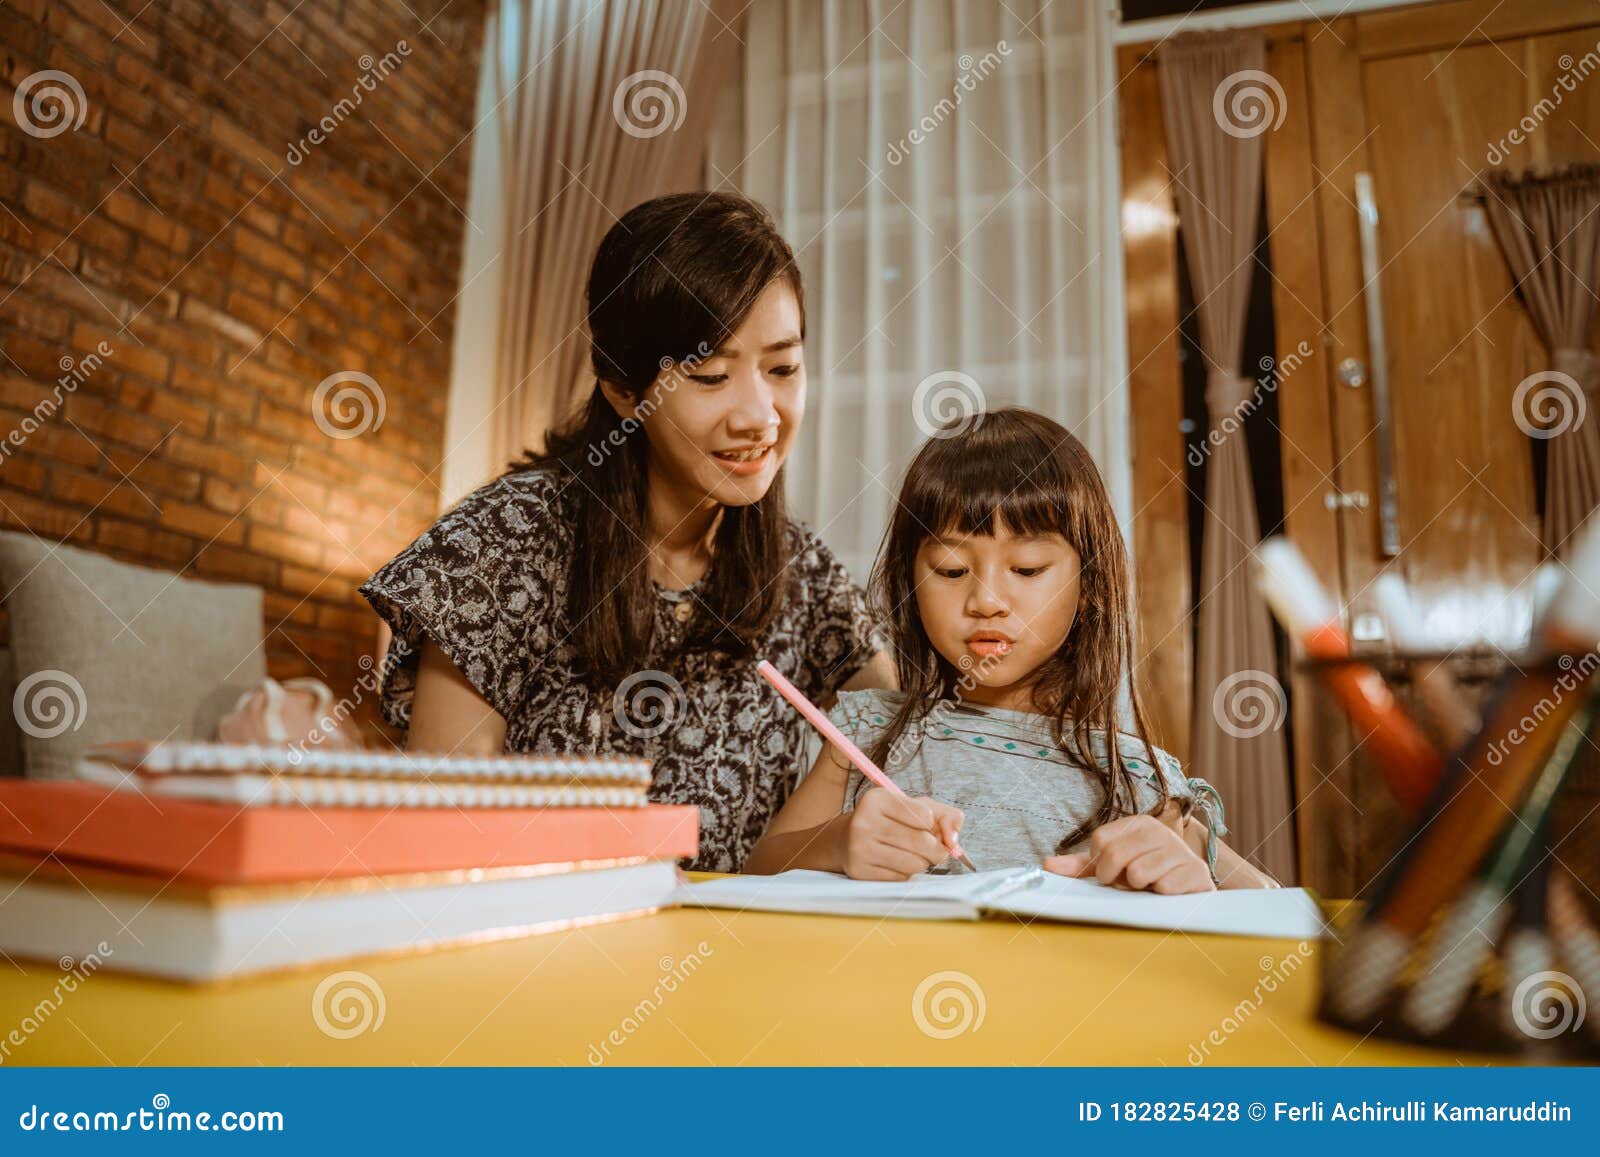 mother and daughter home schooling studying together